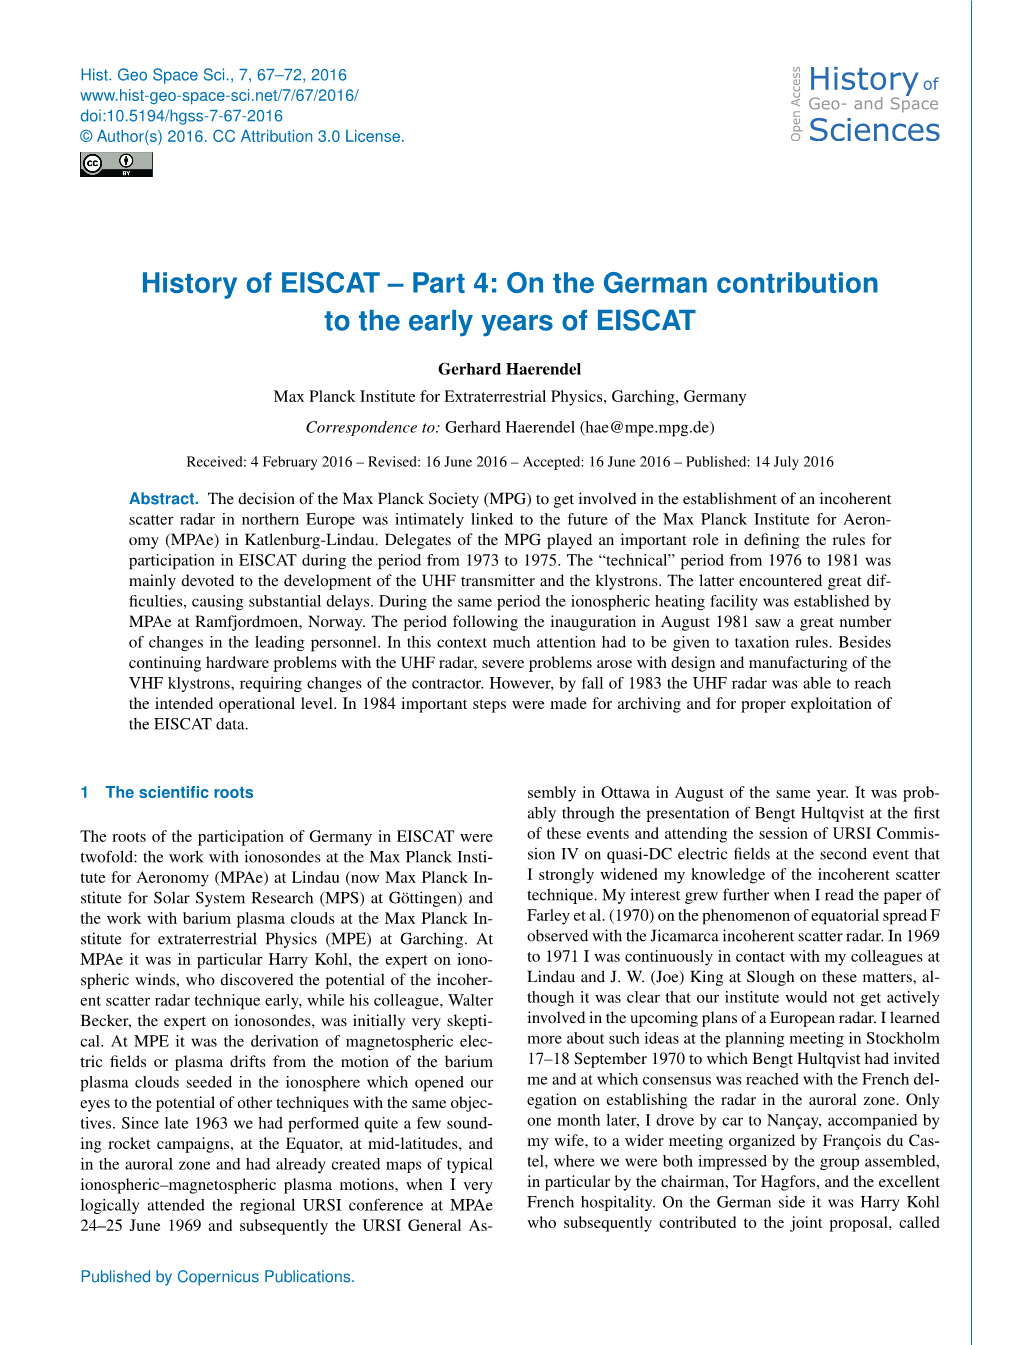 History of EISCAT – Part 4: on the German Contribution to the Early Years of EISCAT